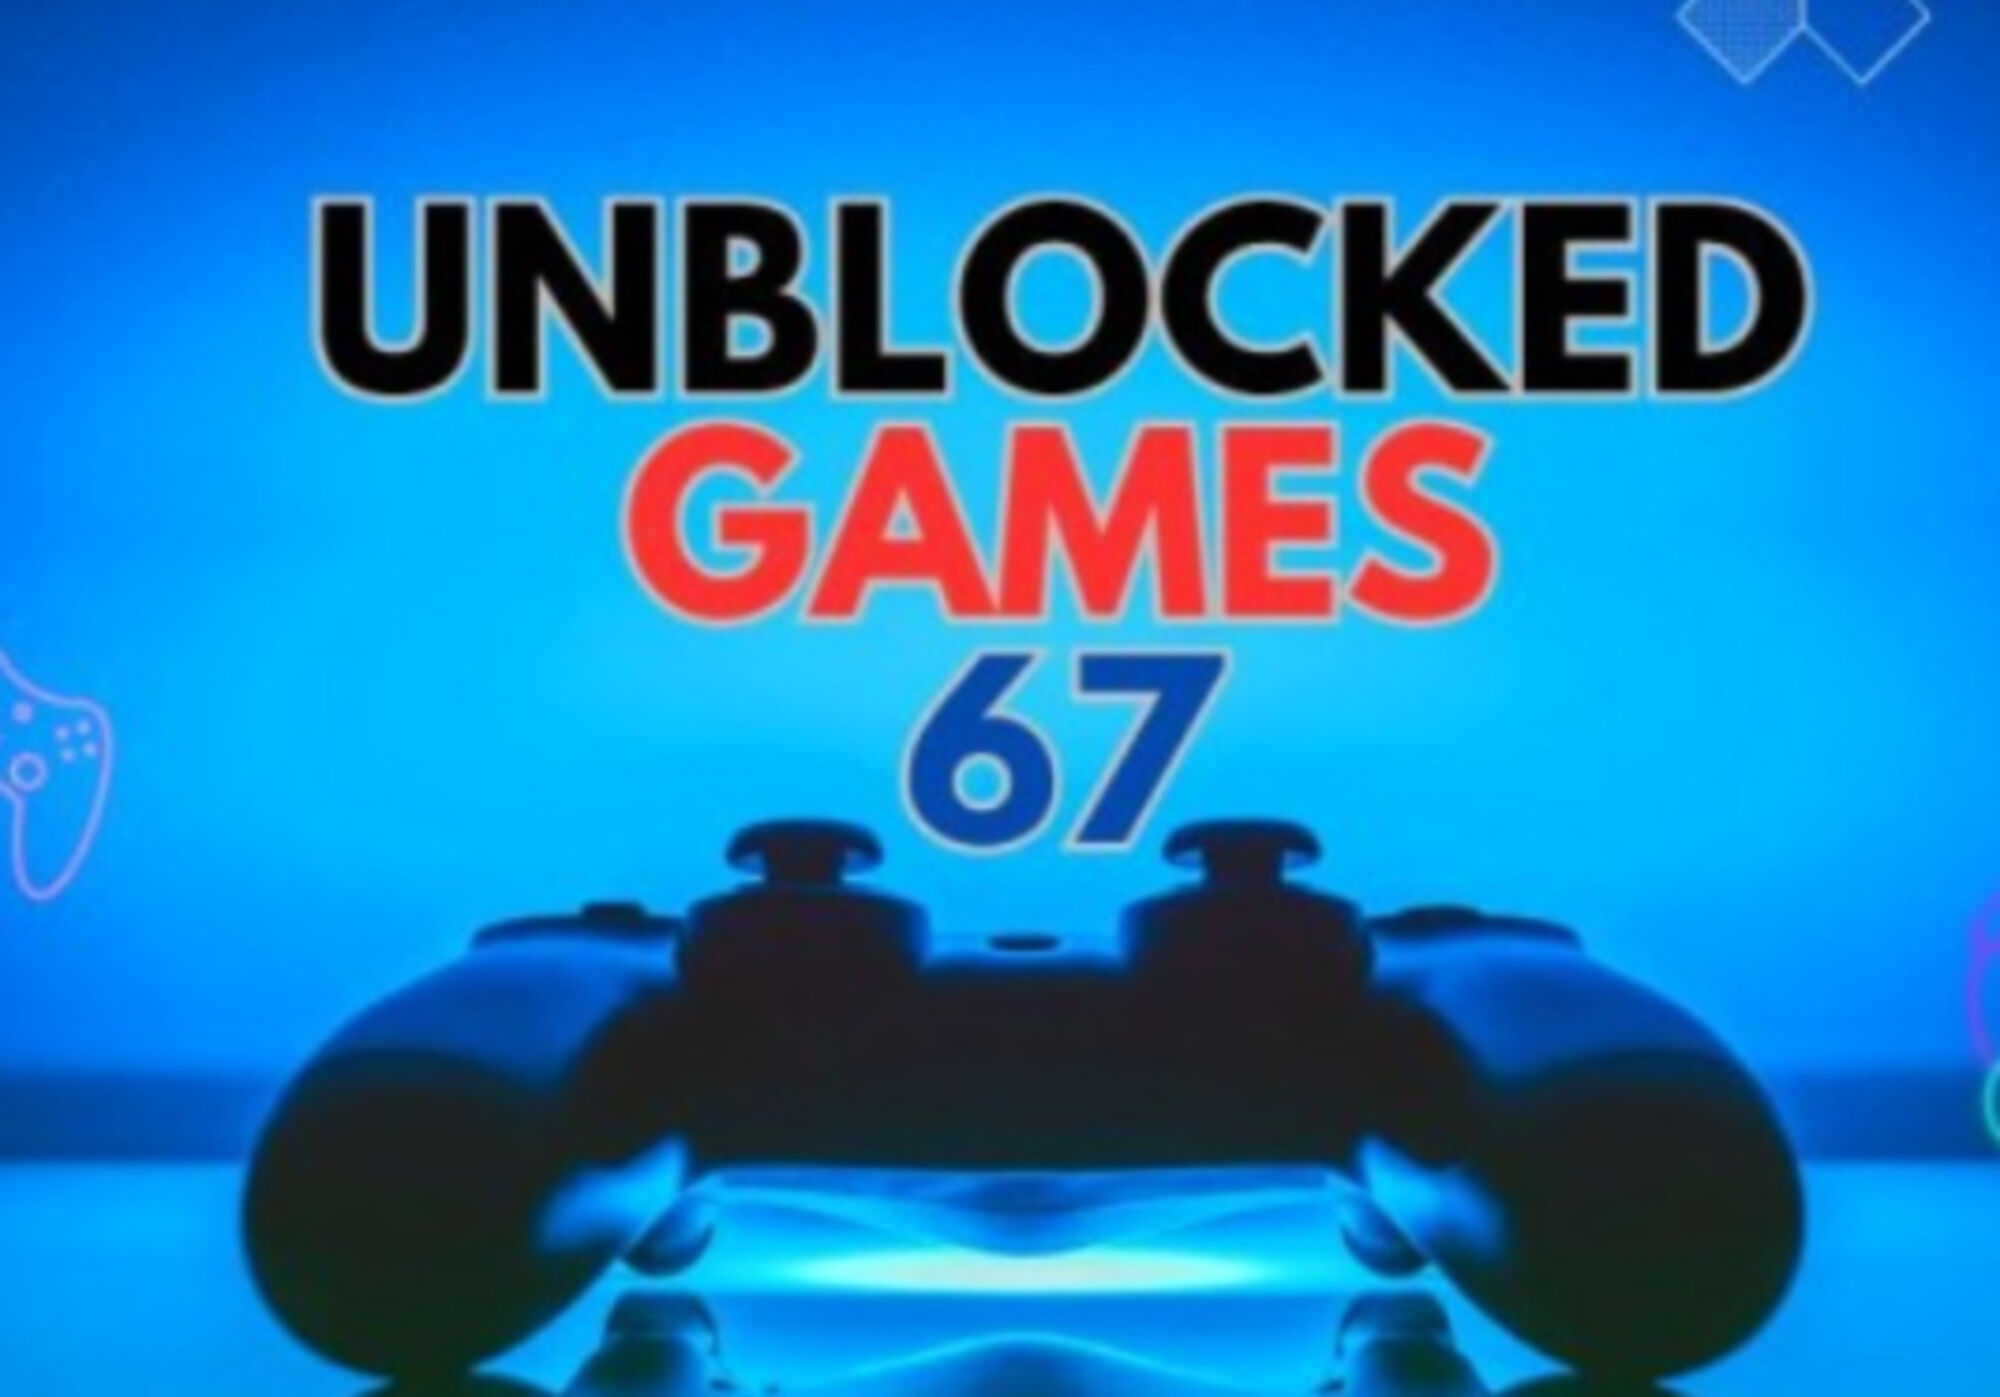 Unblocked Games 67 